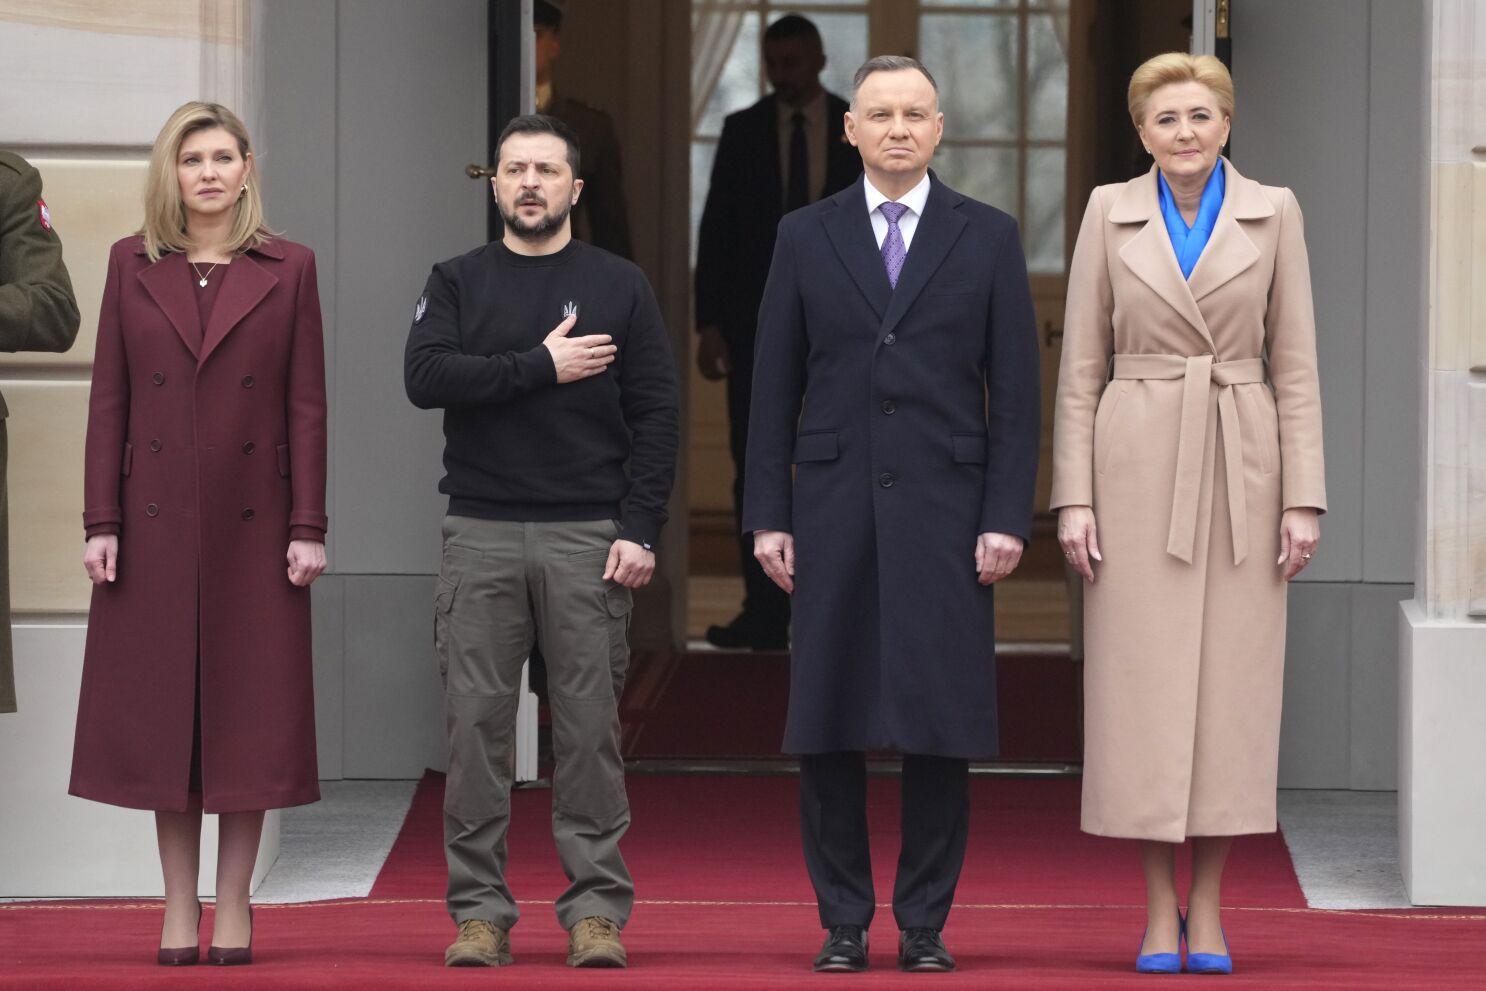 For the first time since the beginning of the invasion: President Zelensky arrived in Poland